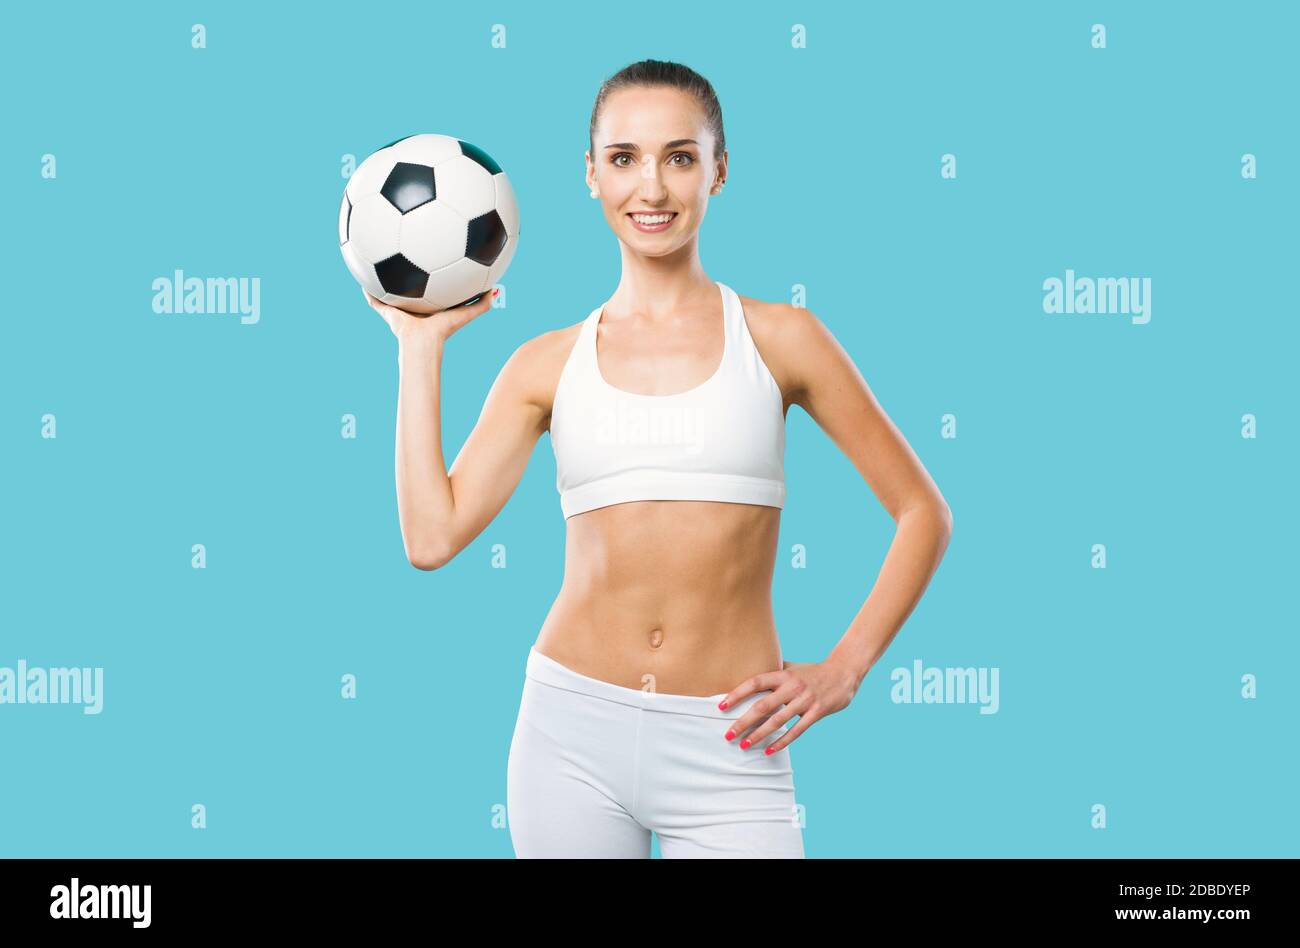 Happy female athlete holding a soccer ball and smiling, sports and challenge concept Stock Photo